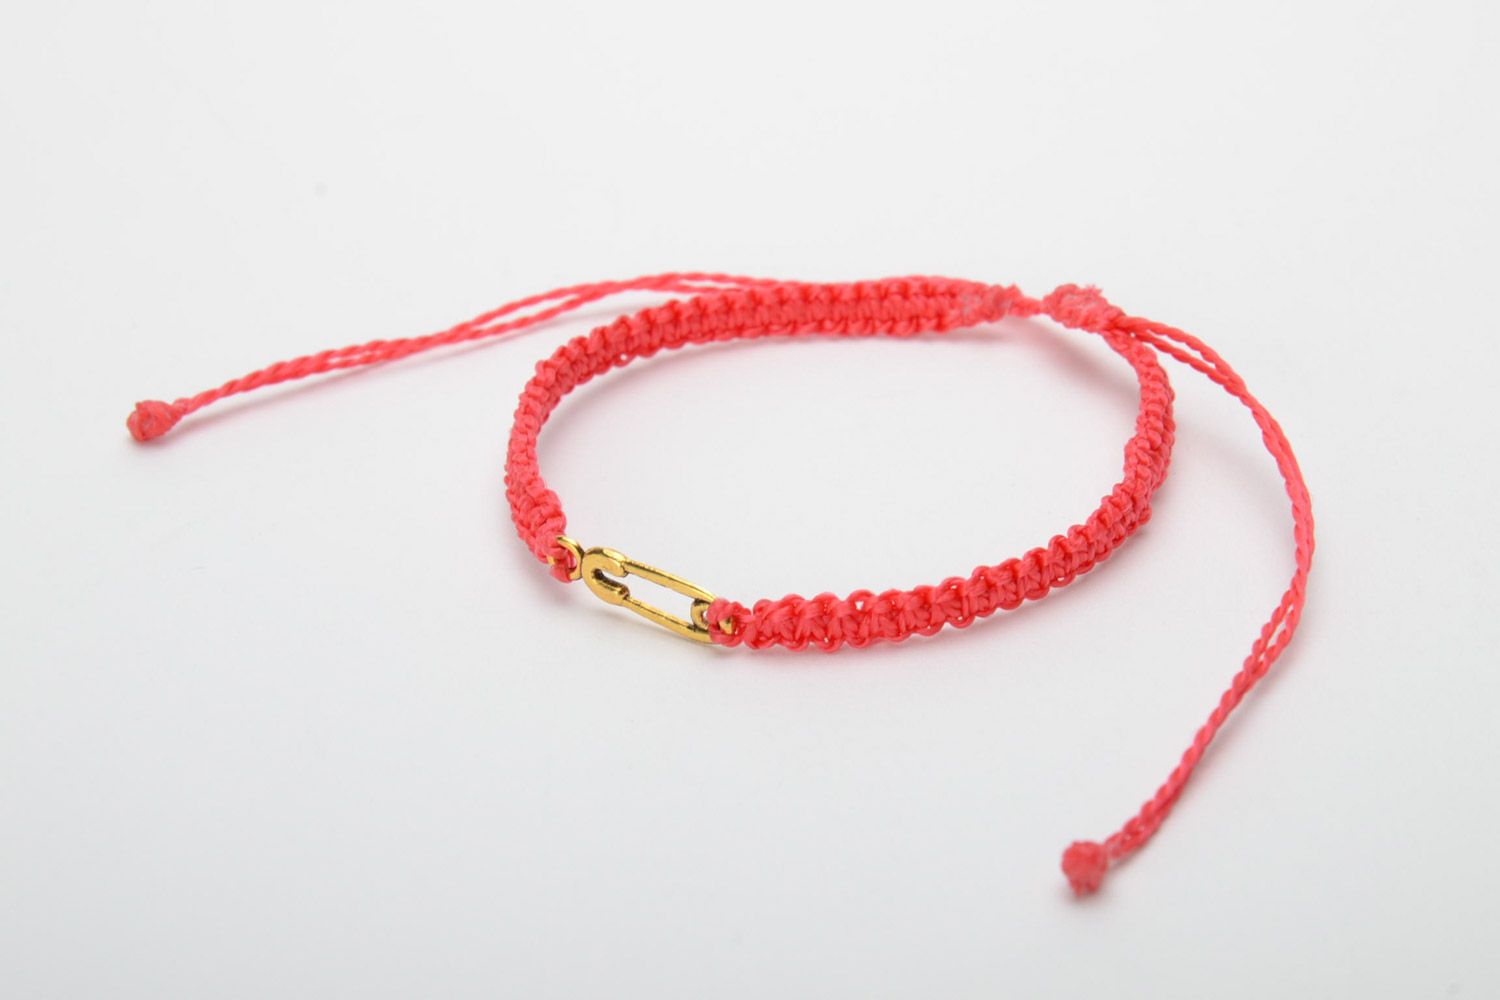 Handmade women's woven thread bracelet of red color with metal pin charm photo 3